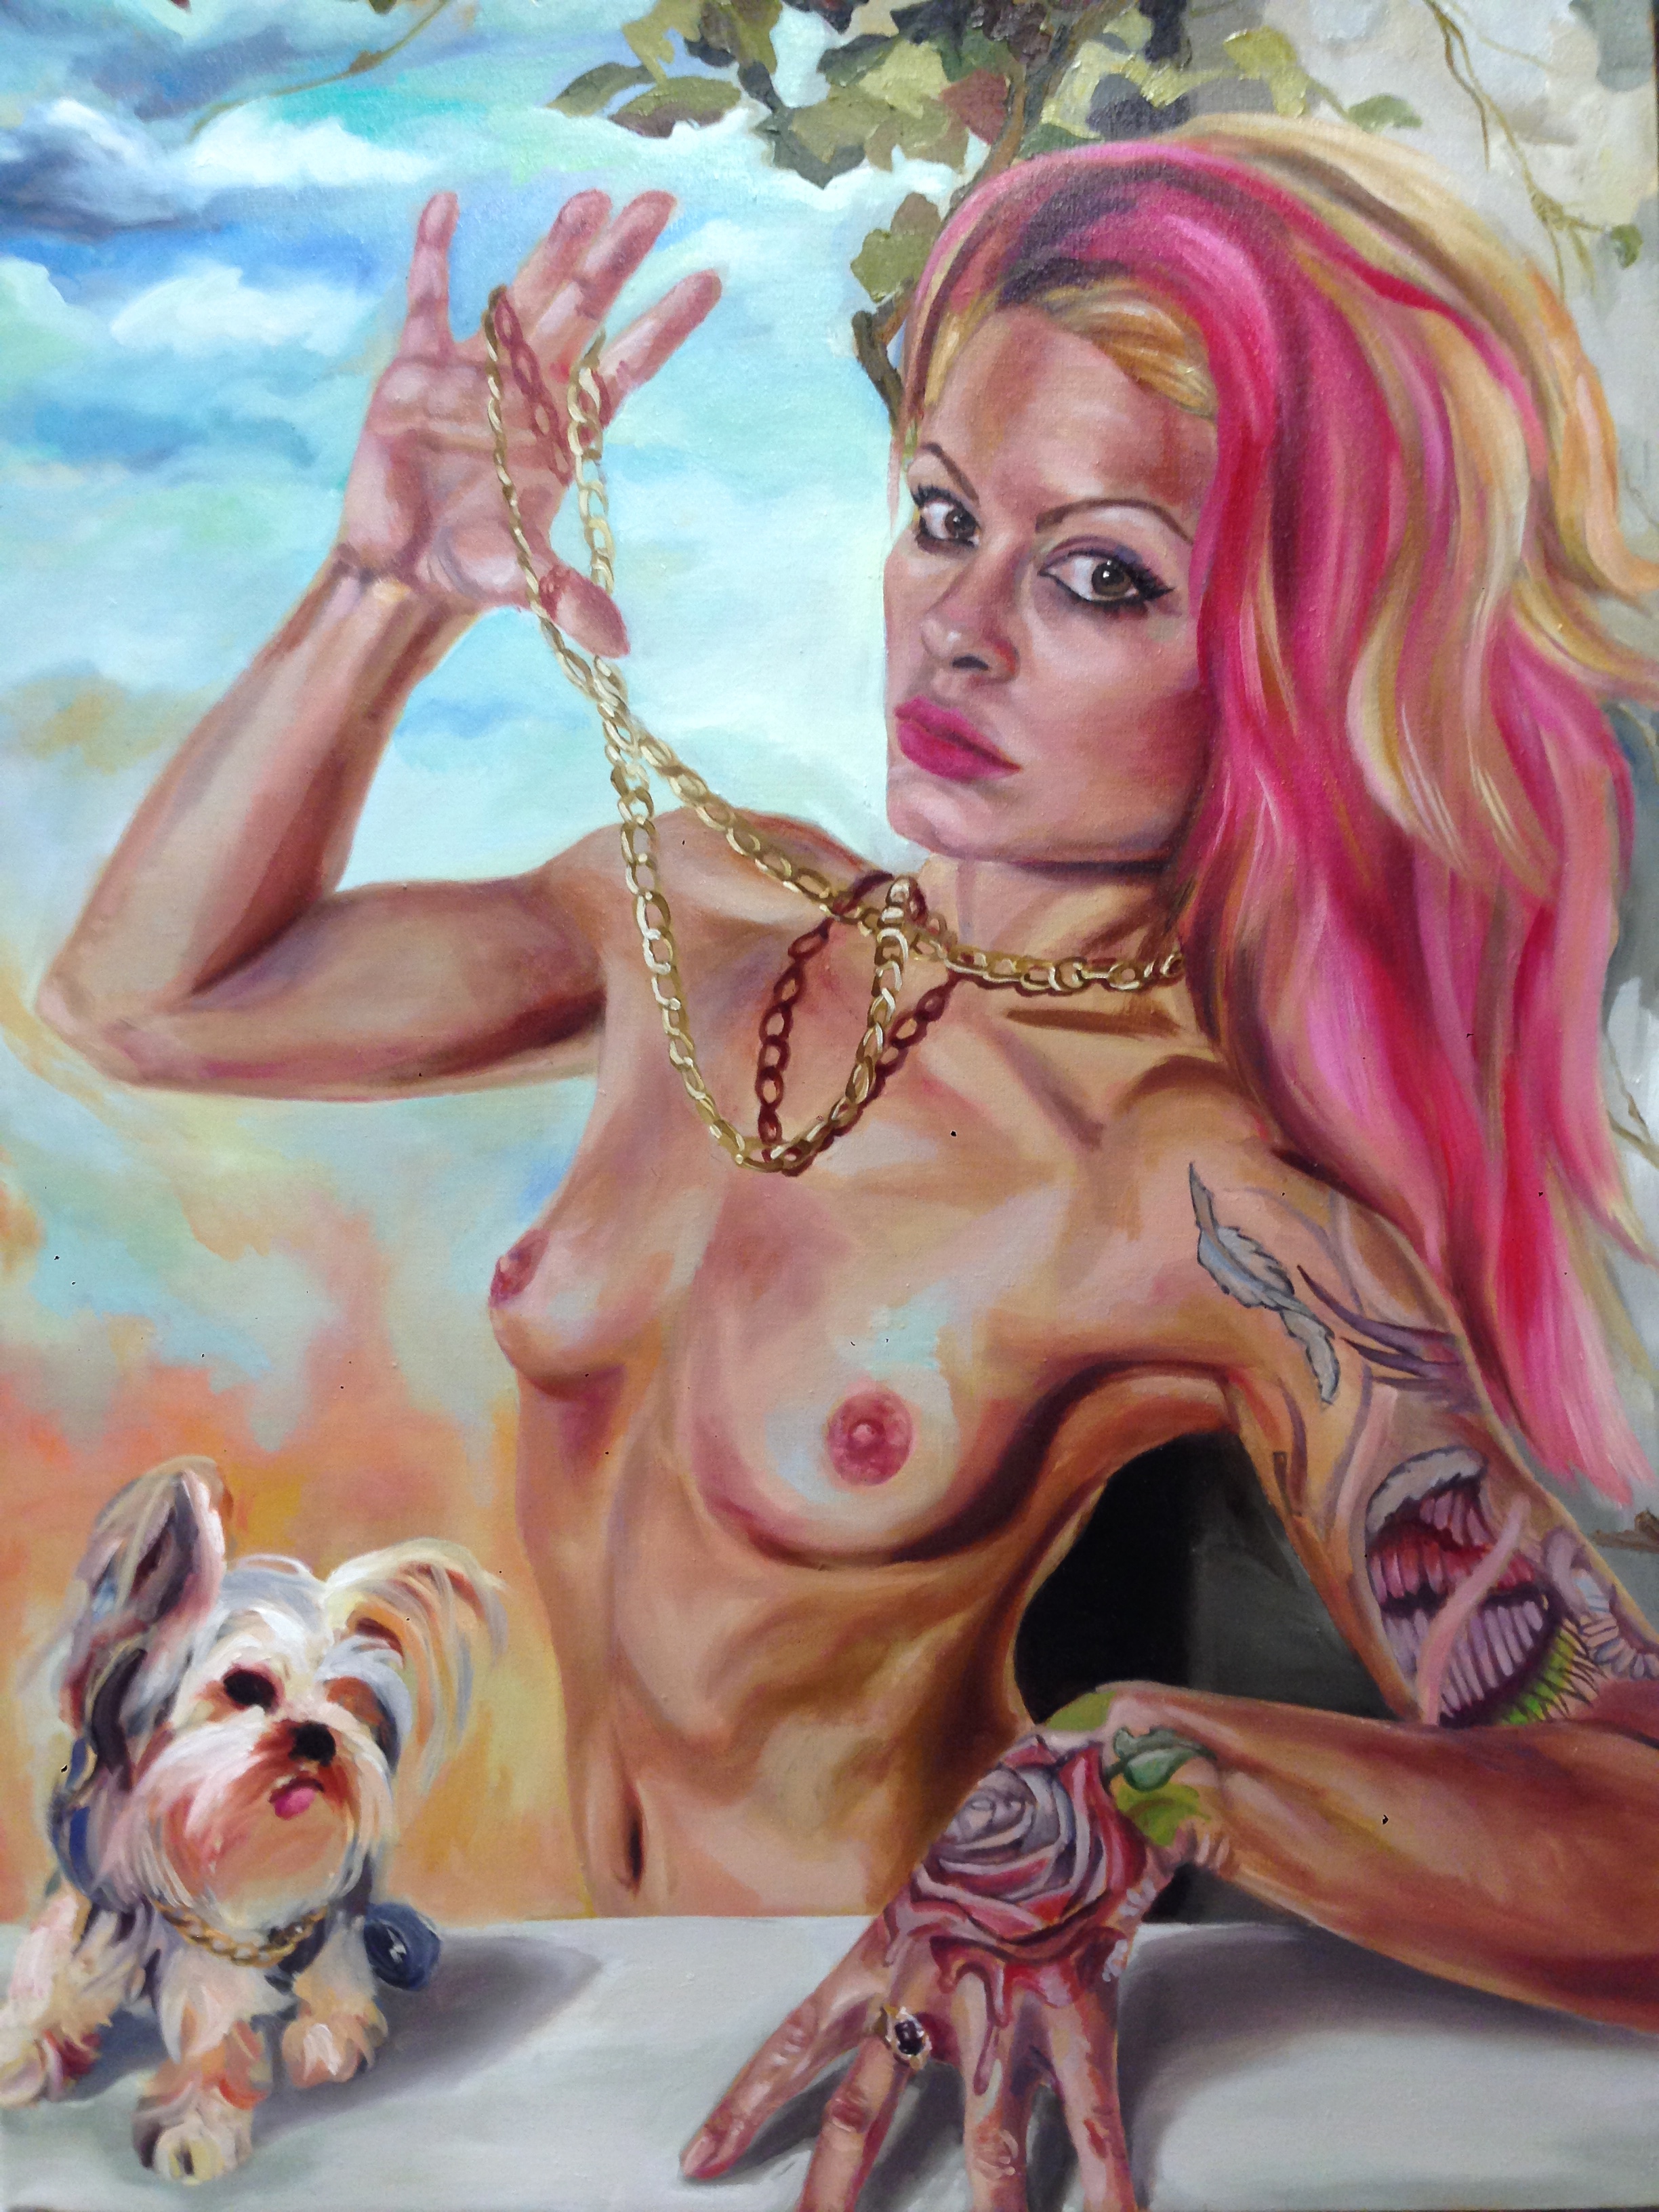  We only wanted your gold chainz   30x40” oil on linen    